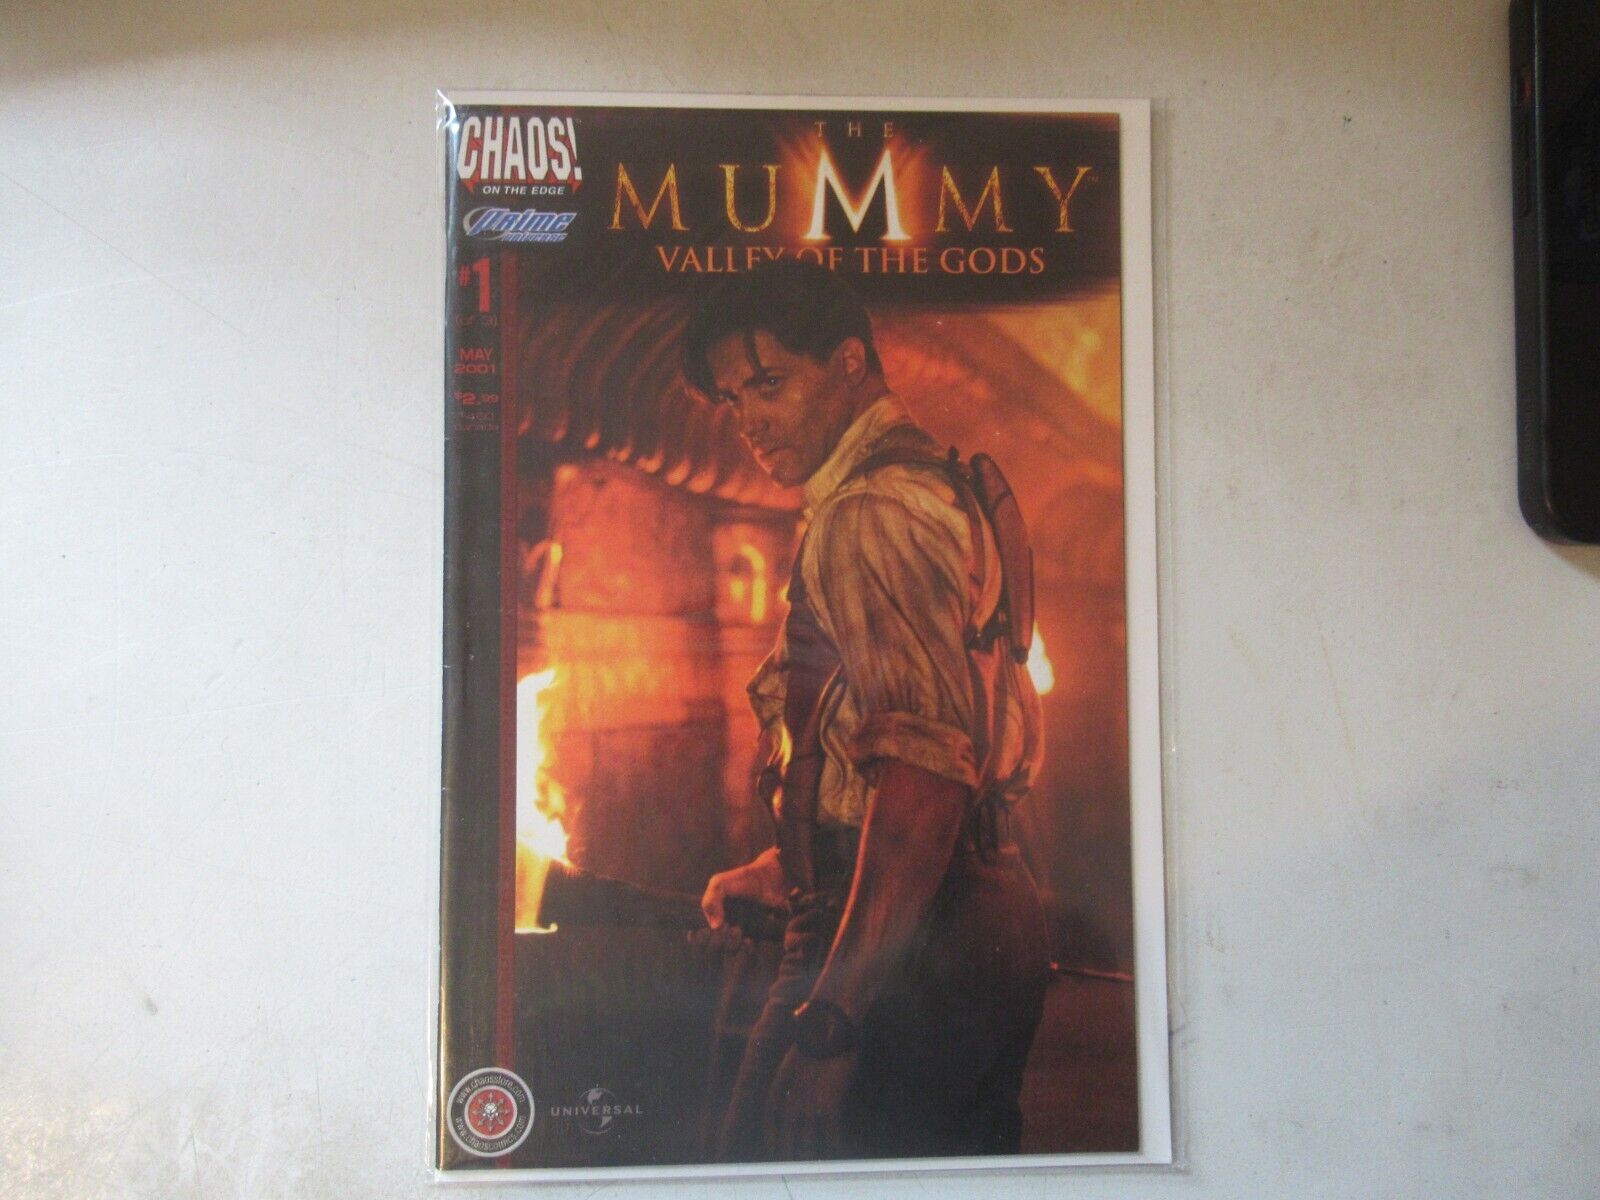 Chaos Comics The Mummy Valley of the Gods Brendan Fraser Photo Movie cover #1